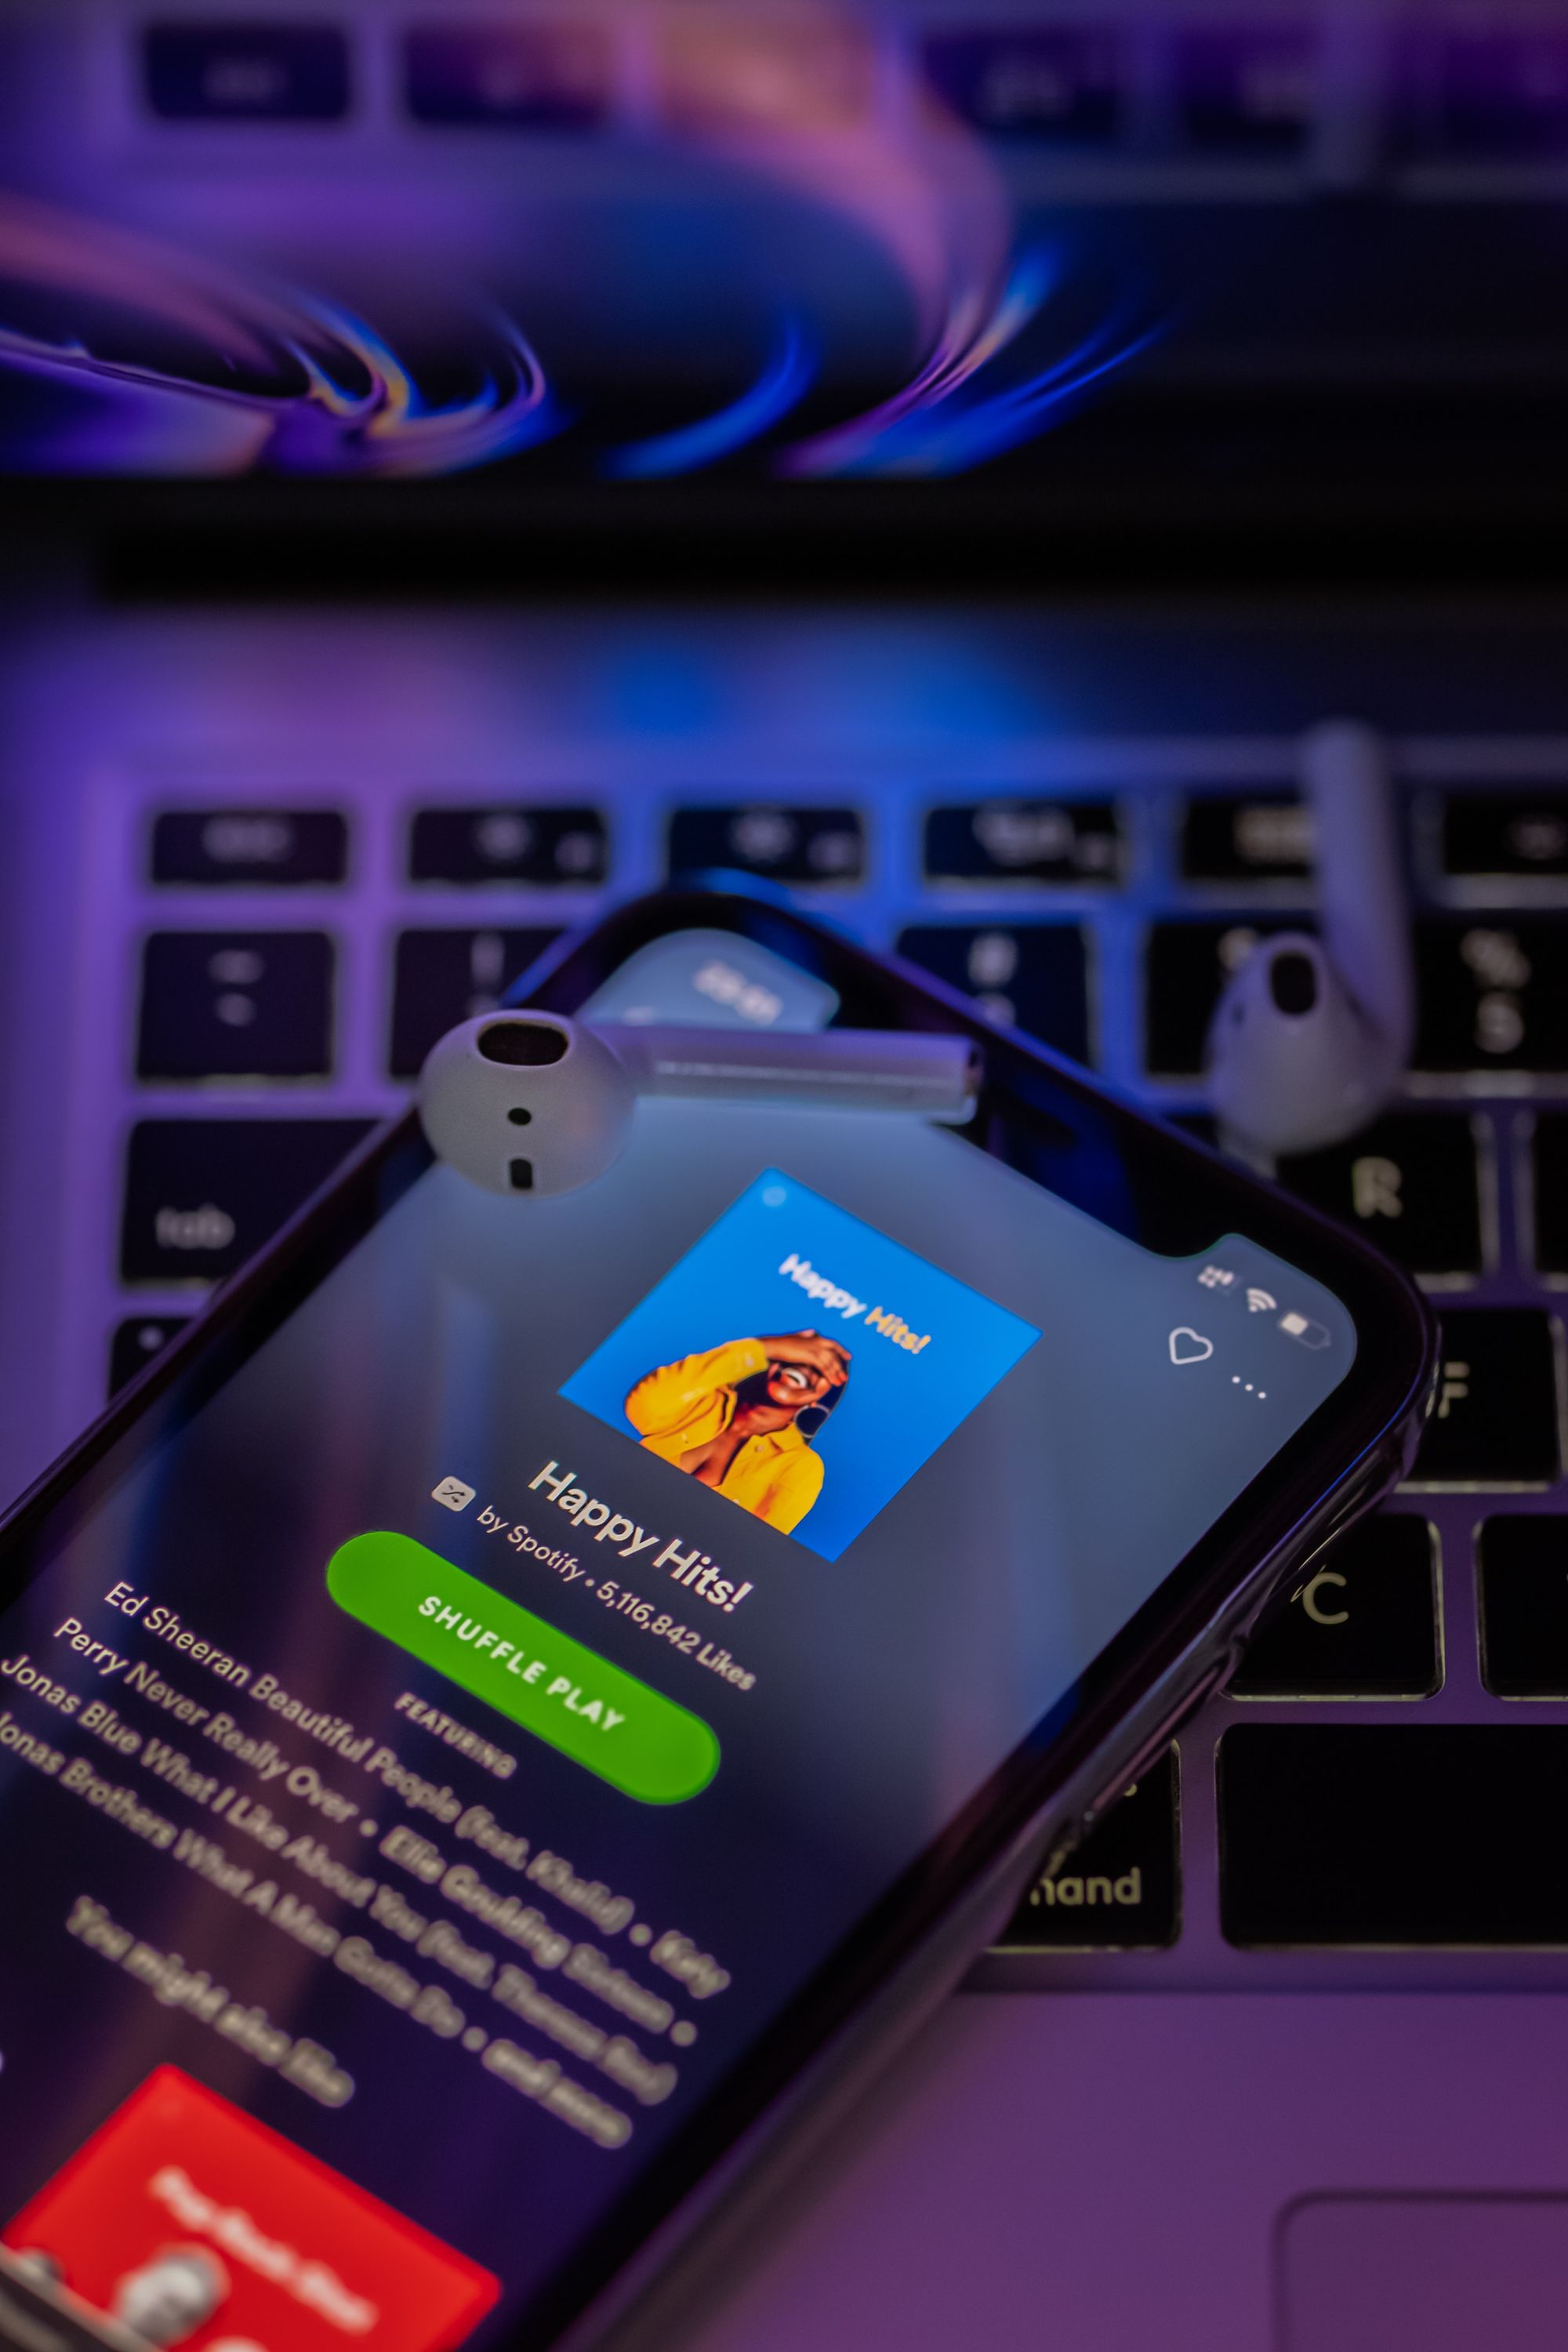 Spotify uses Price-Based Brand Positioning Strategy